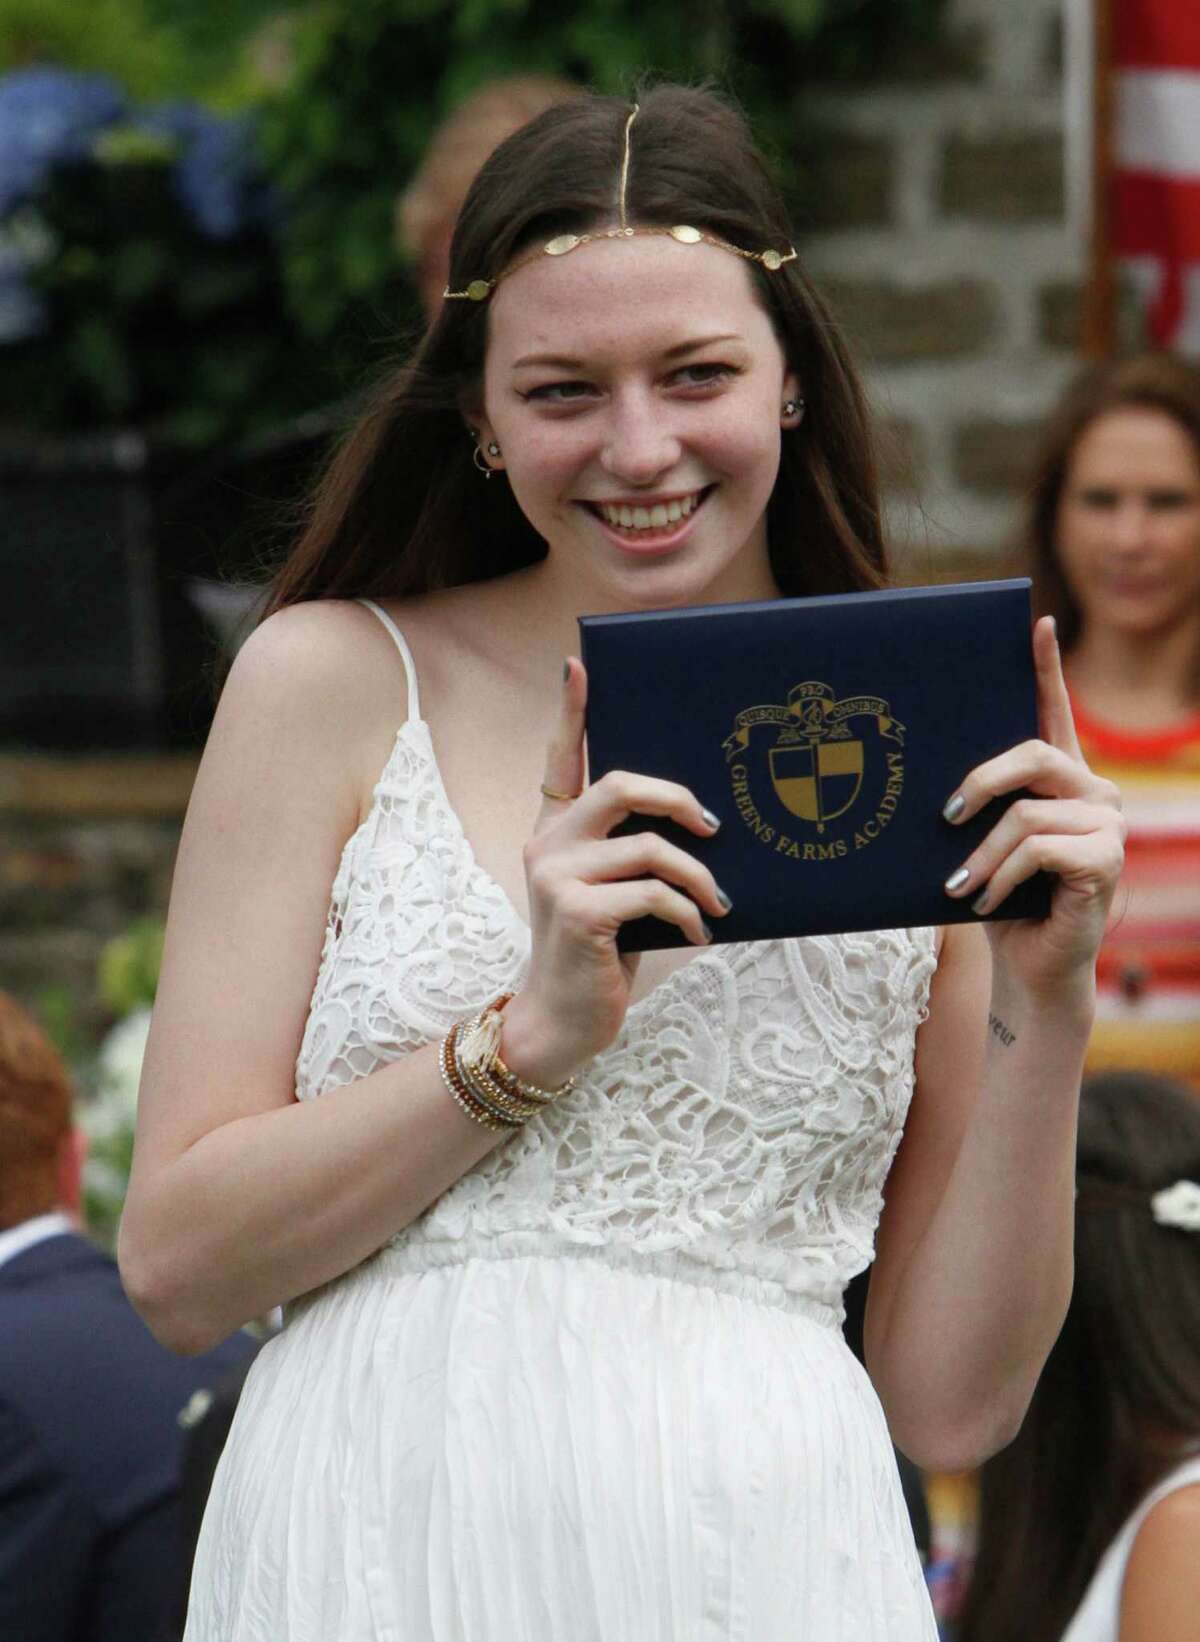 Scenes from the 2015 Commencement Exercises at Greens Farm Academy in Westport, Conn. on Thursday, June 4, 2015.